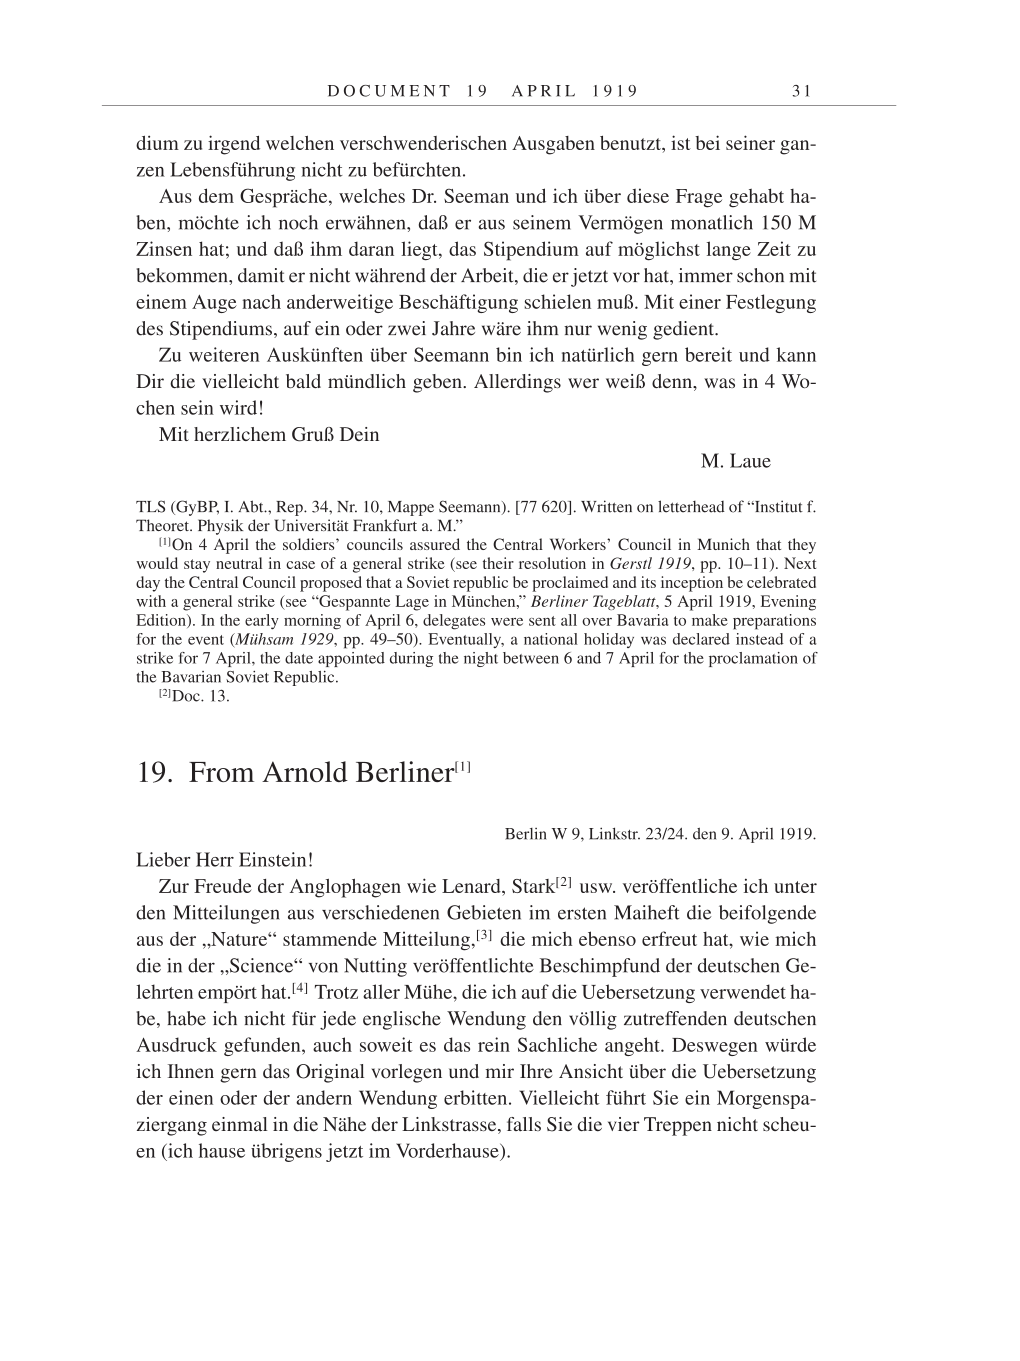 Volume 9: The Berlin Years: Correspondence January 1919-April 1920 page 31